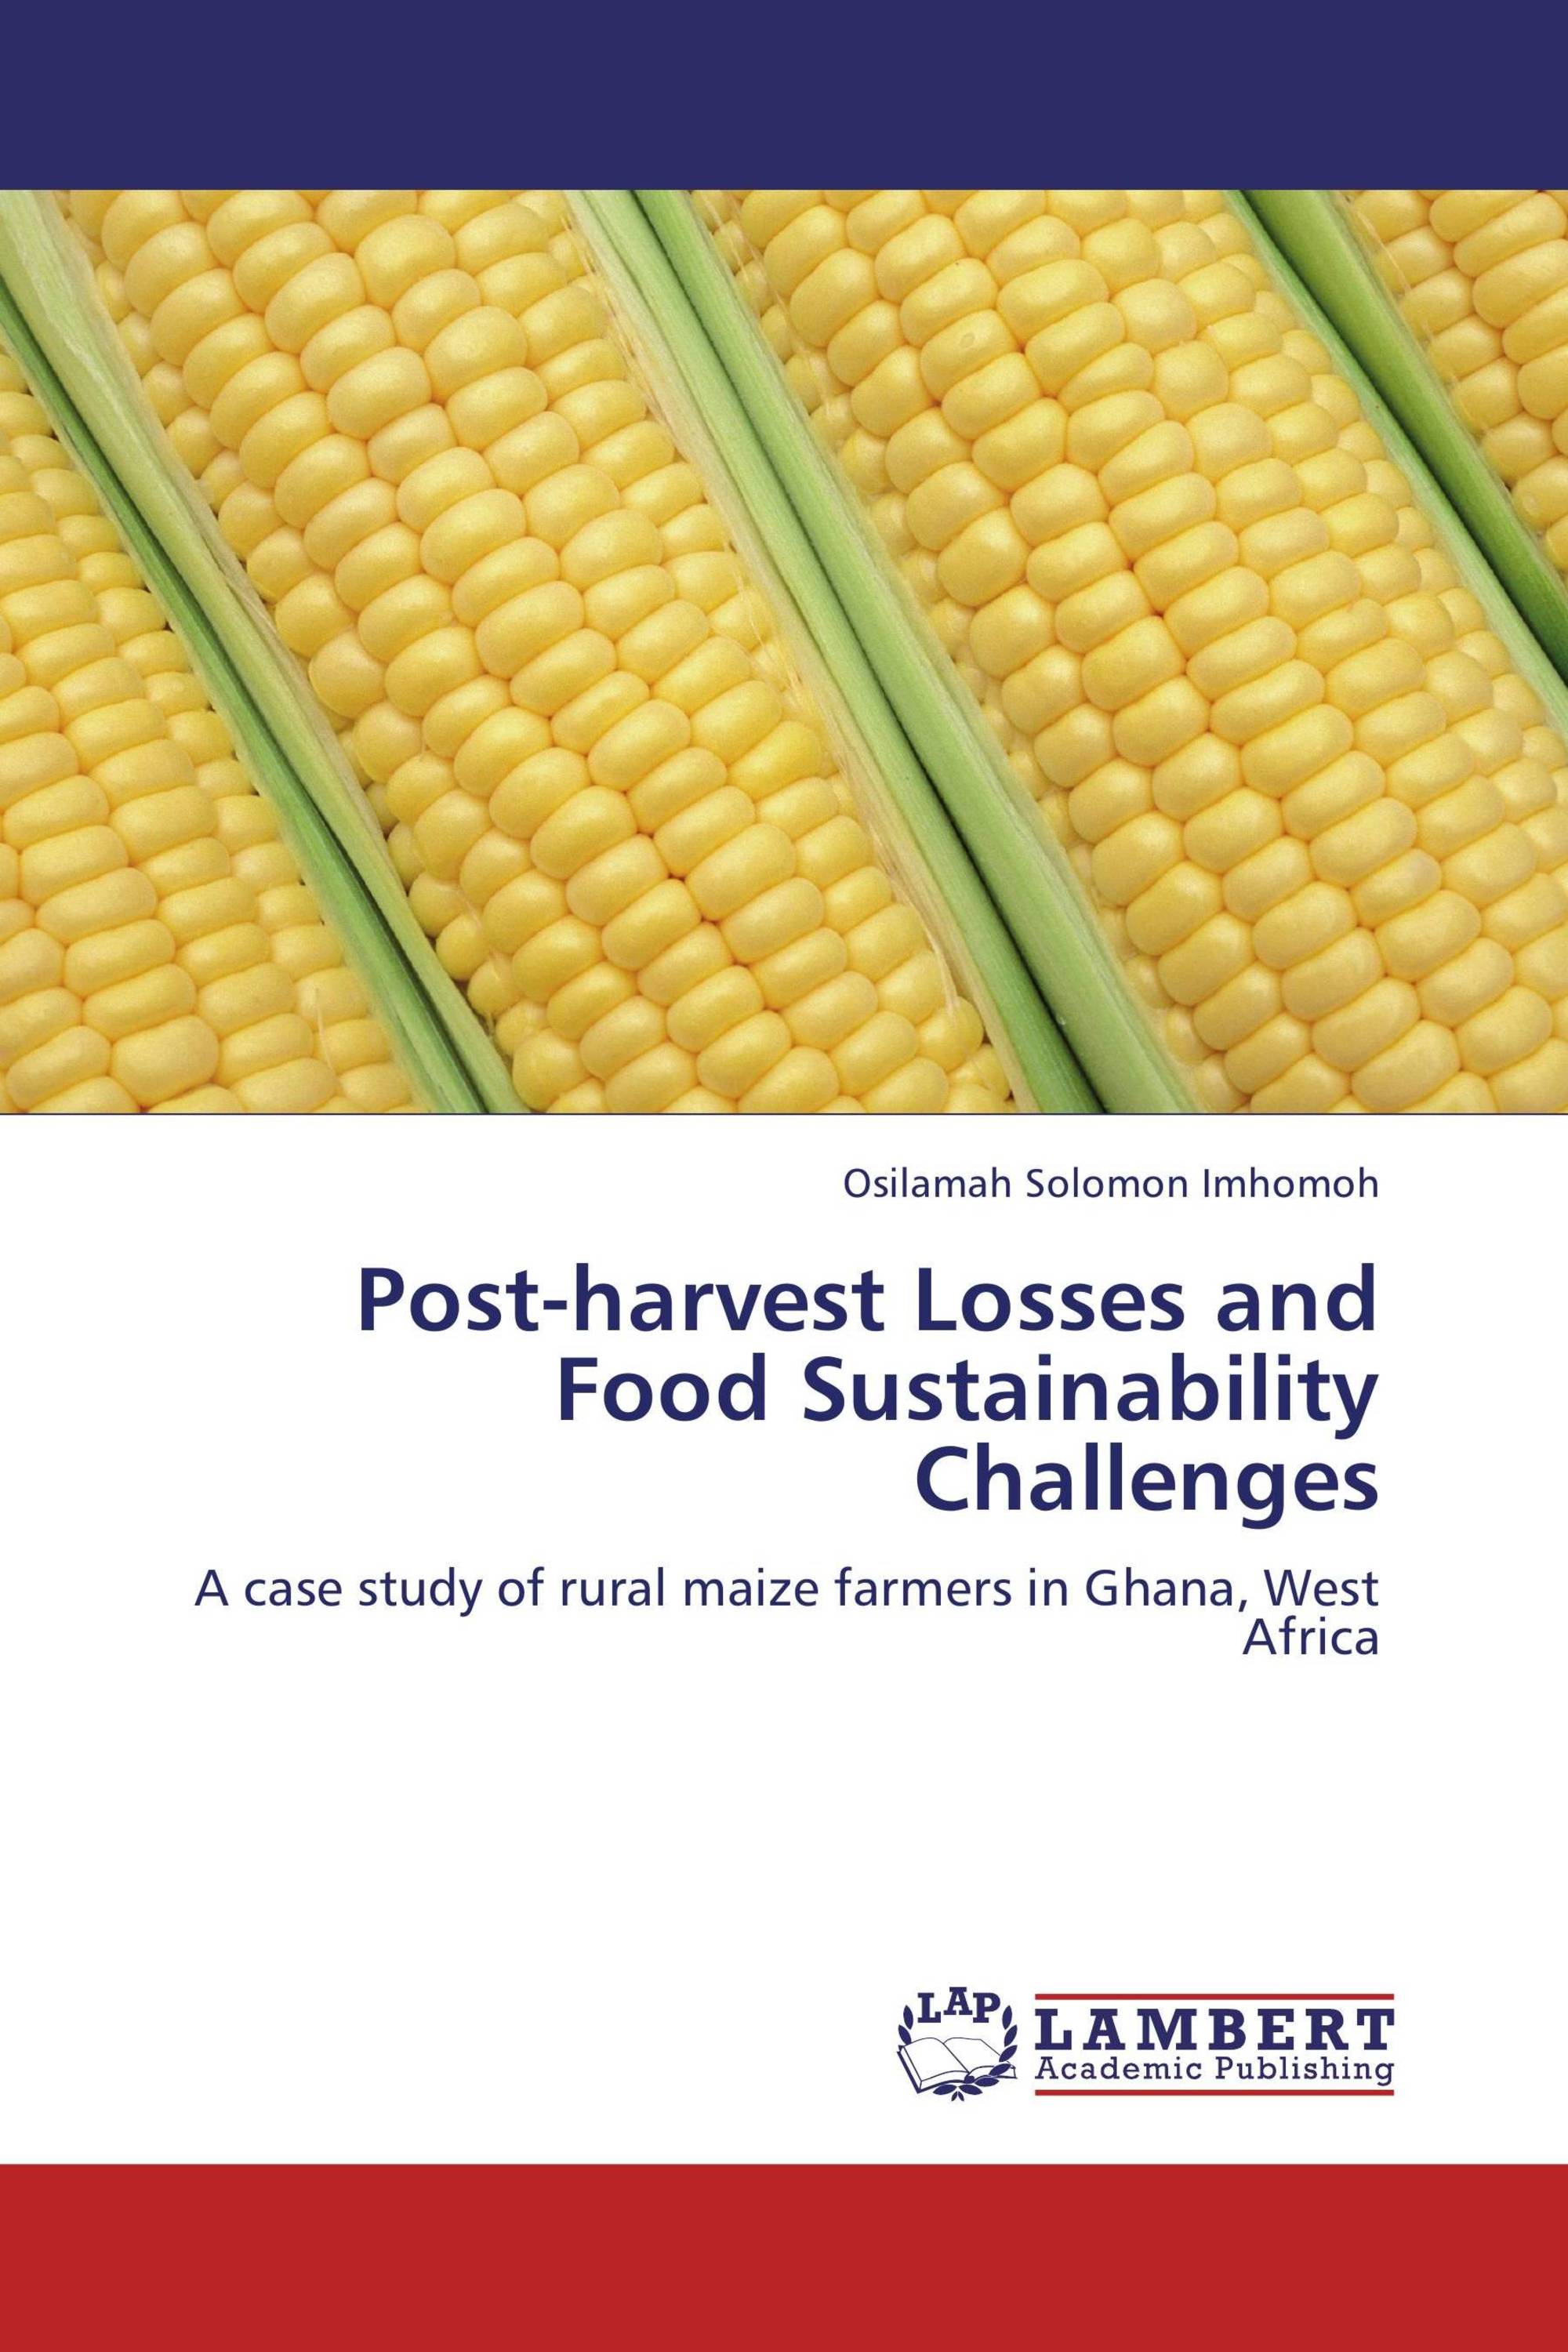 Post-harvest Losses and Food Sustainability Challenges